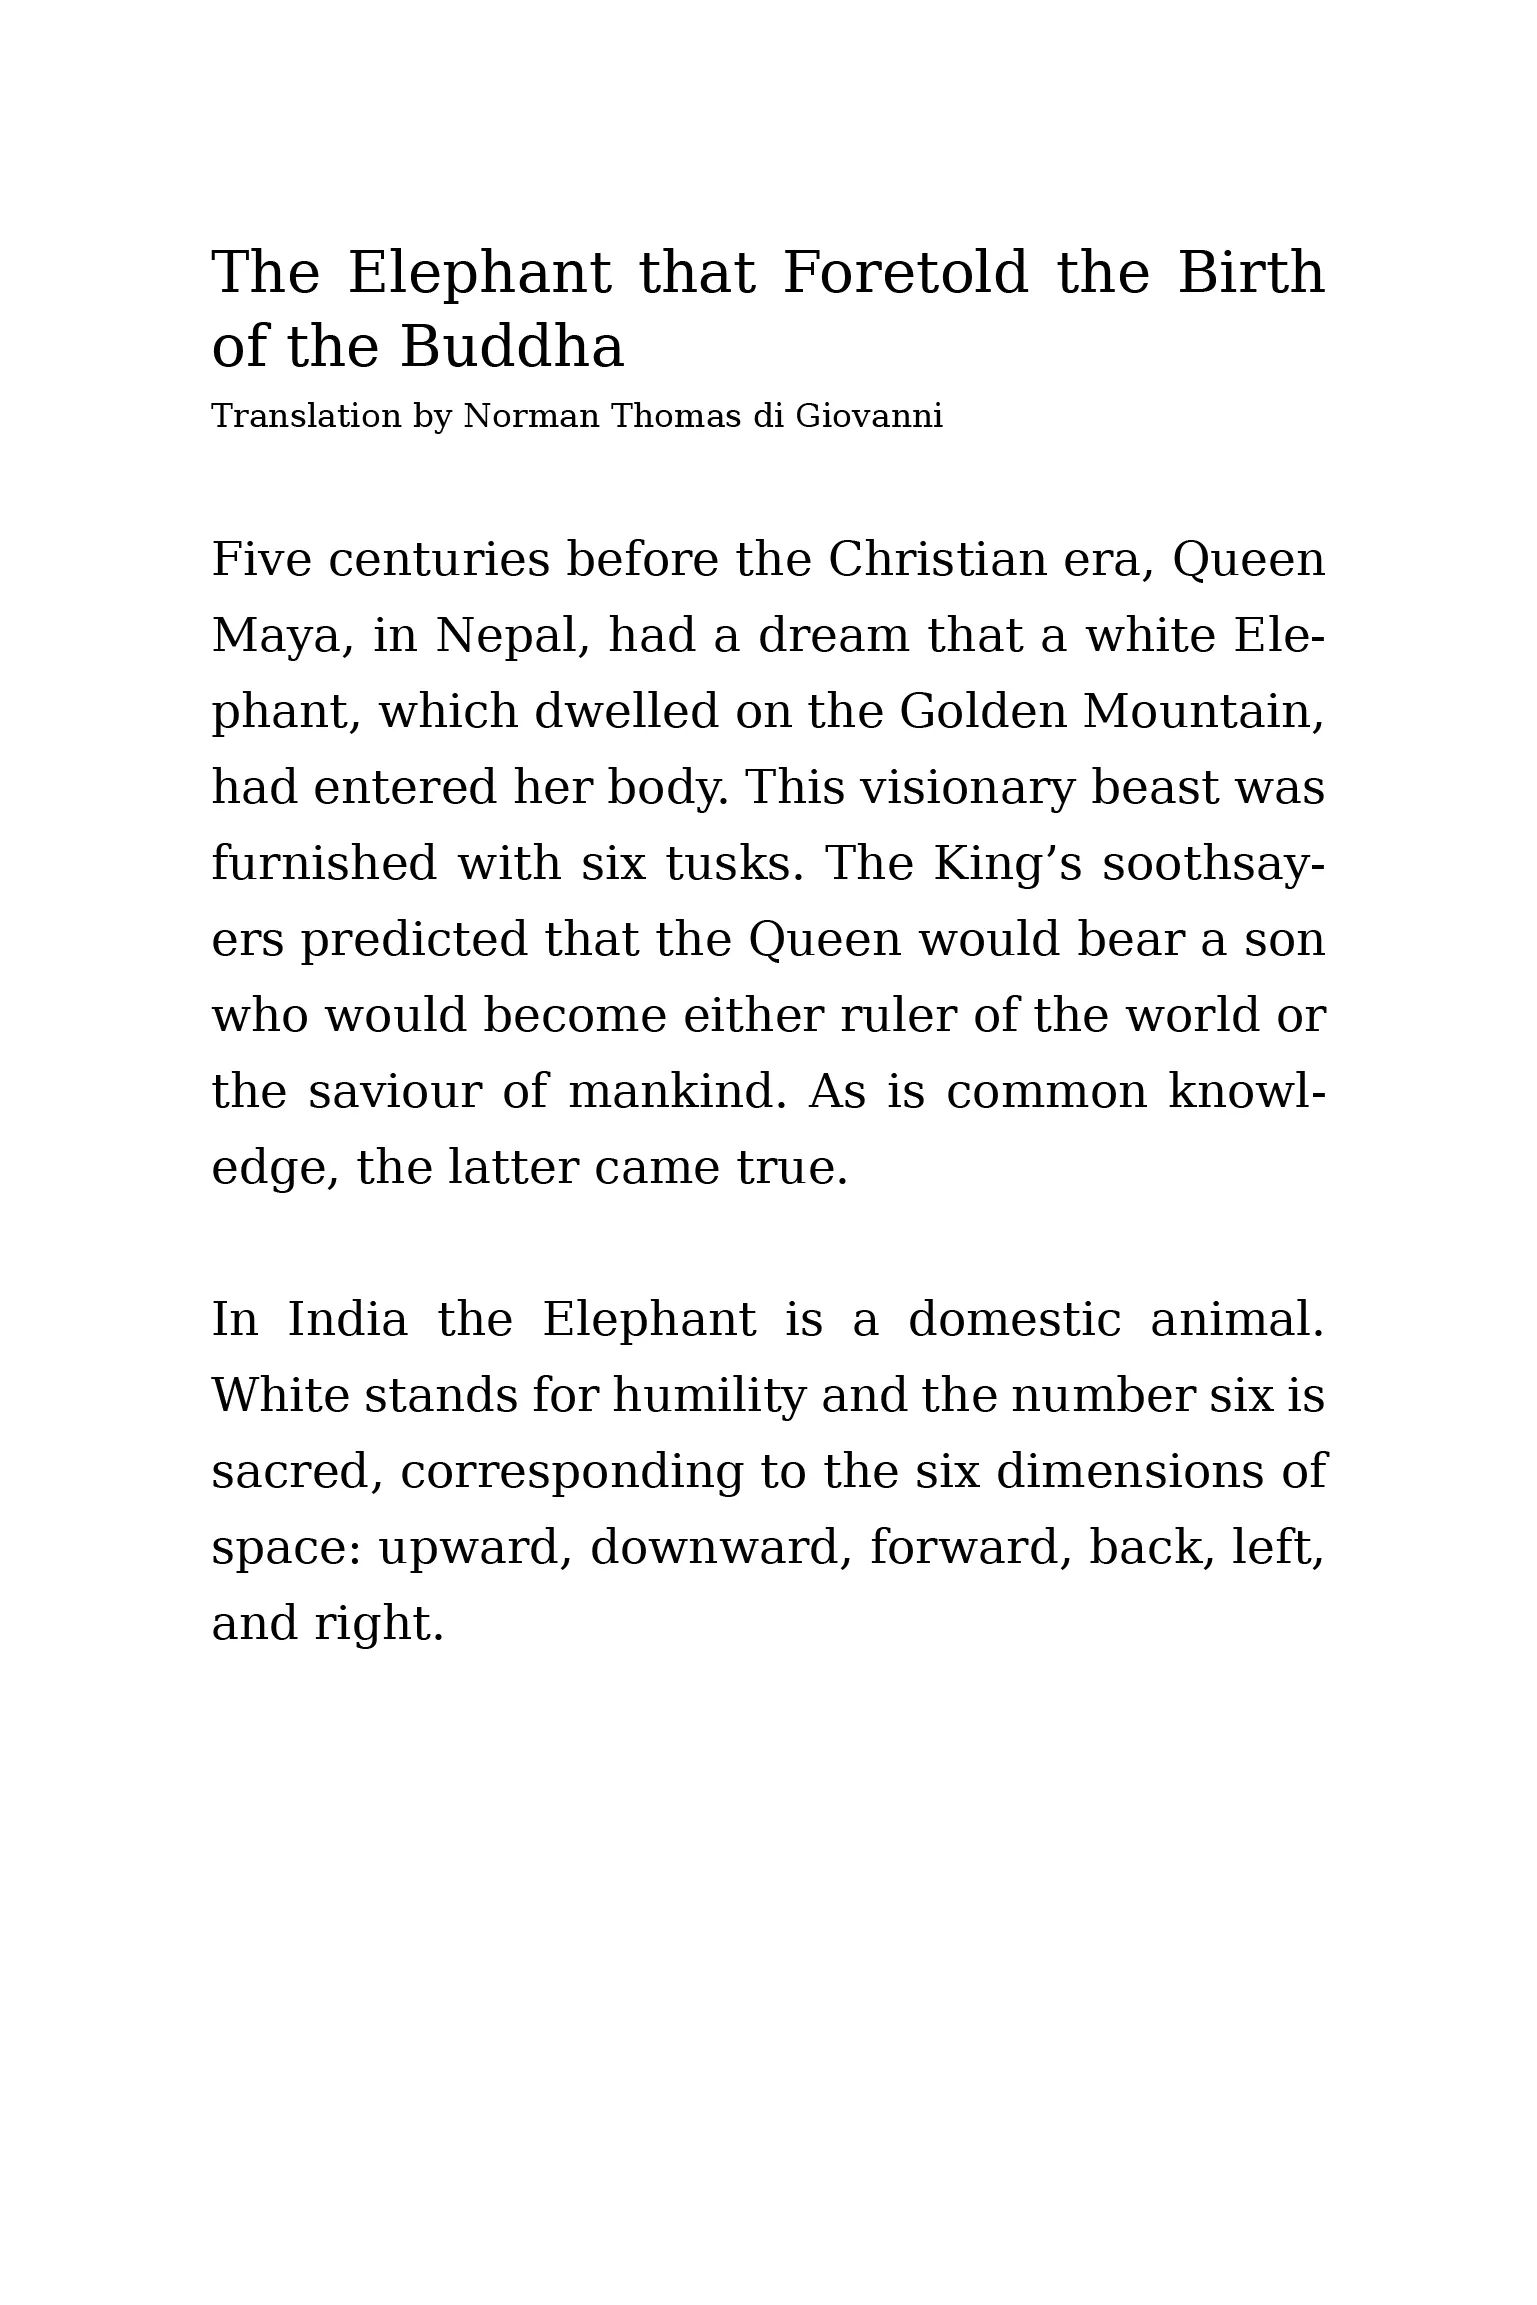 The Elephant that Foretold the Birth of the Buddha: 1970 Translation by Norman Thomas di Giovanni. Reference only.